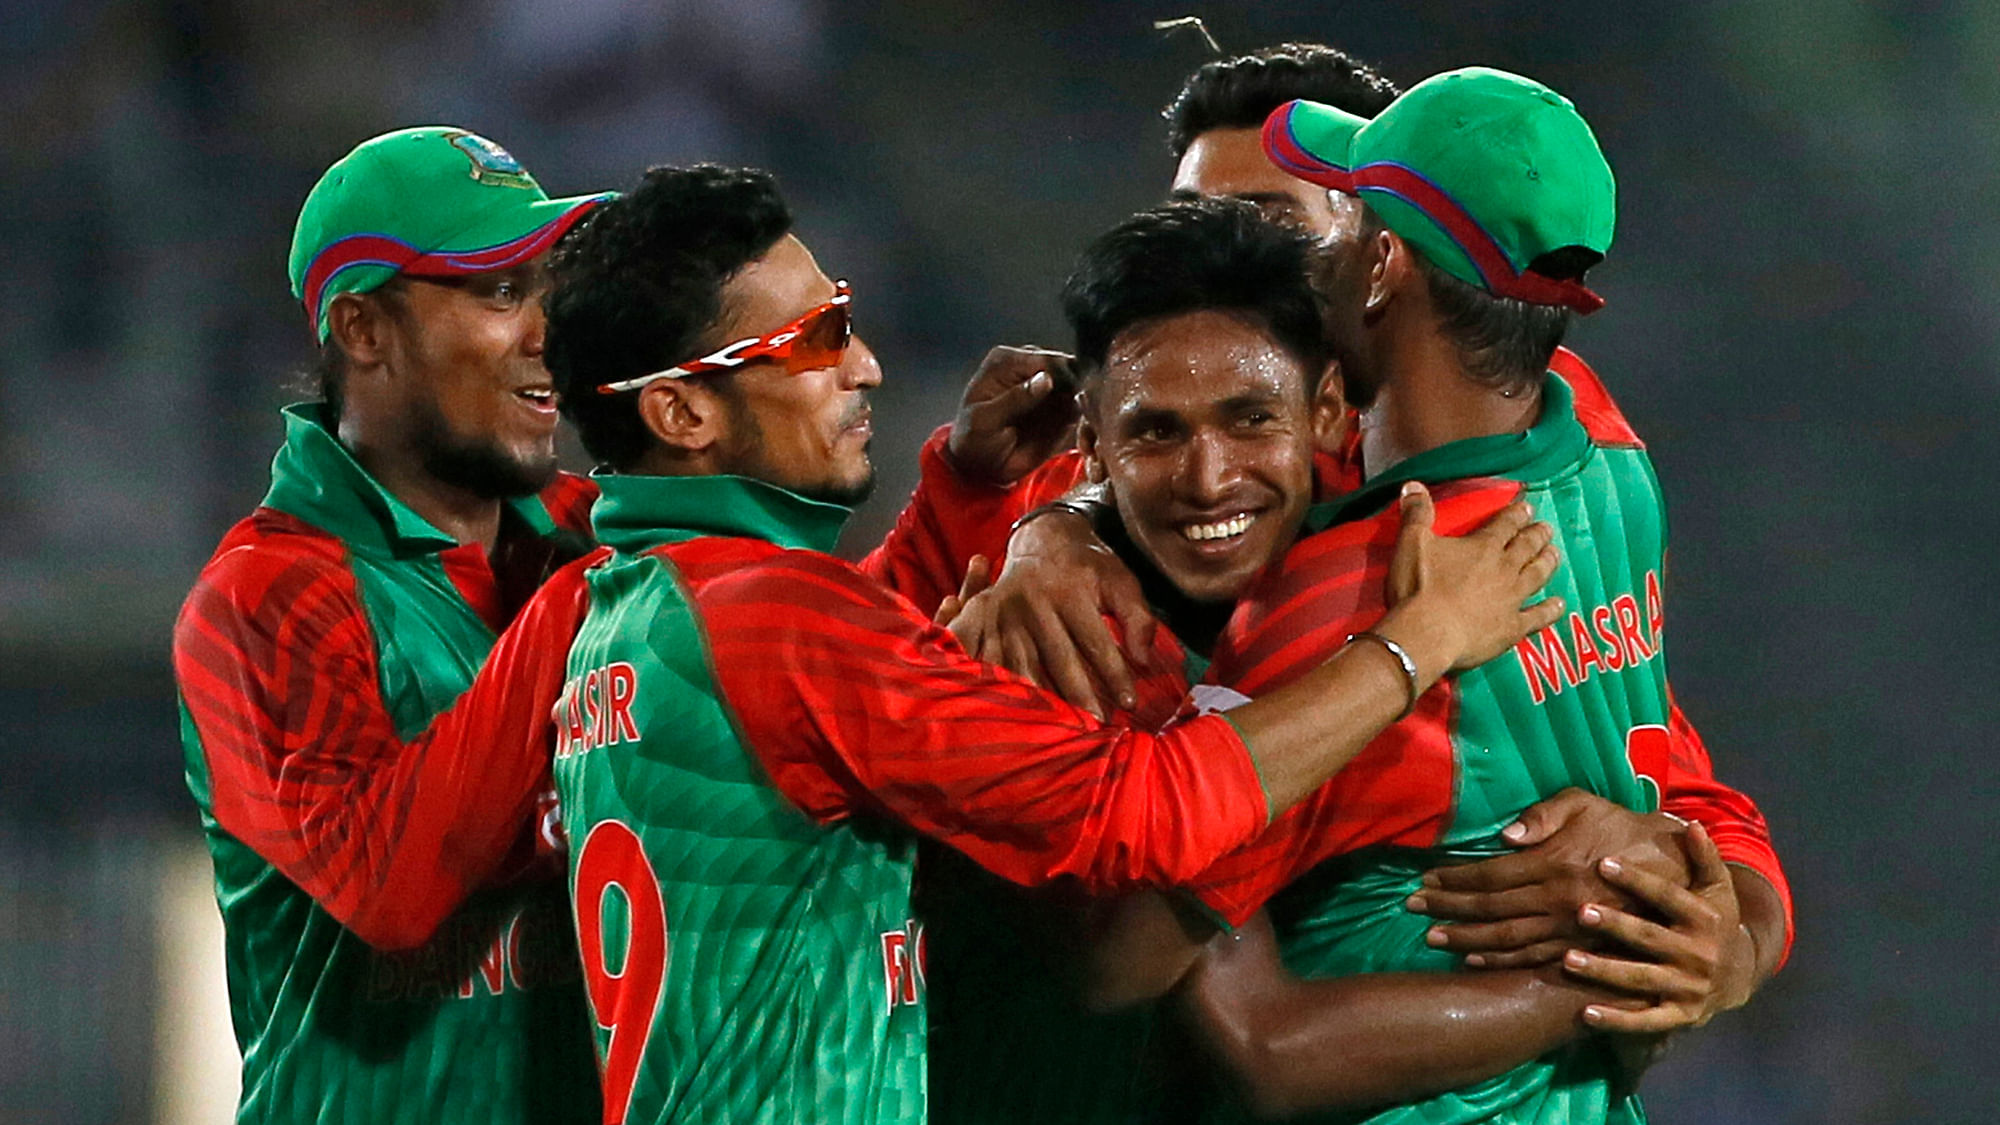 Bangladesh’s hopes for the cricket World Cup have been hit by injuries to several key players, including Mustafizur Rahman.